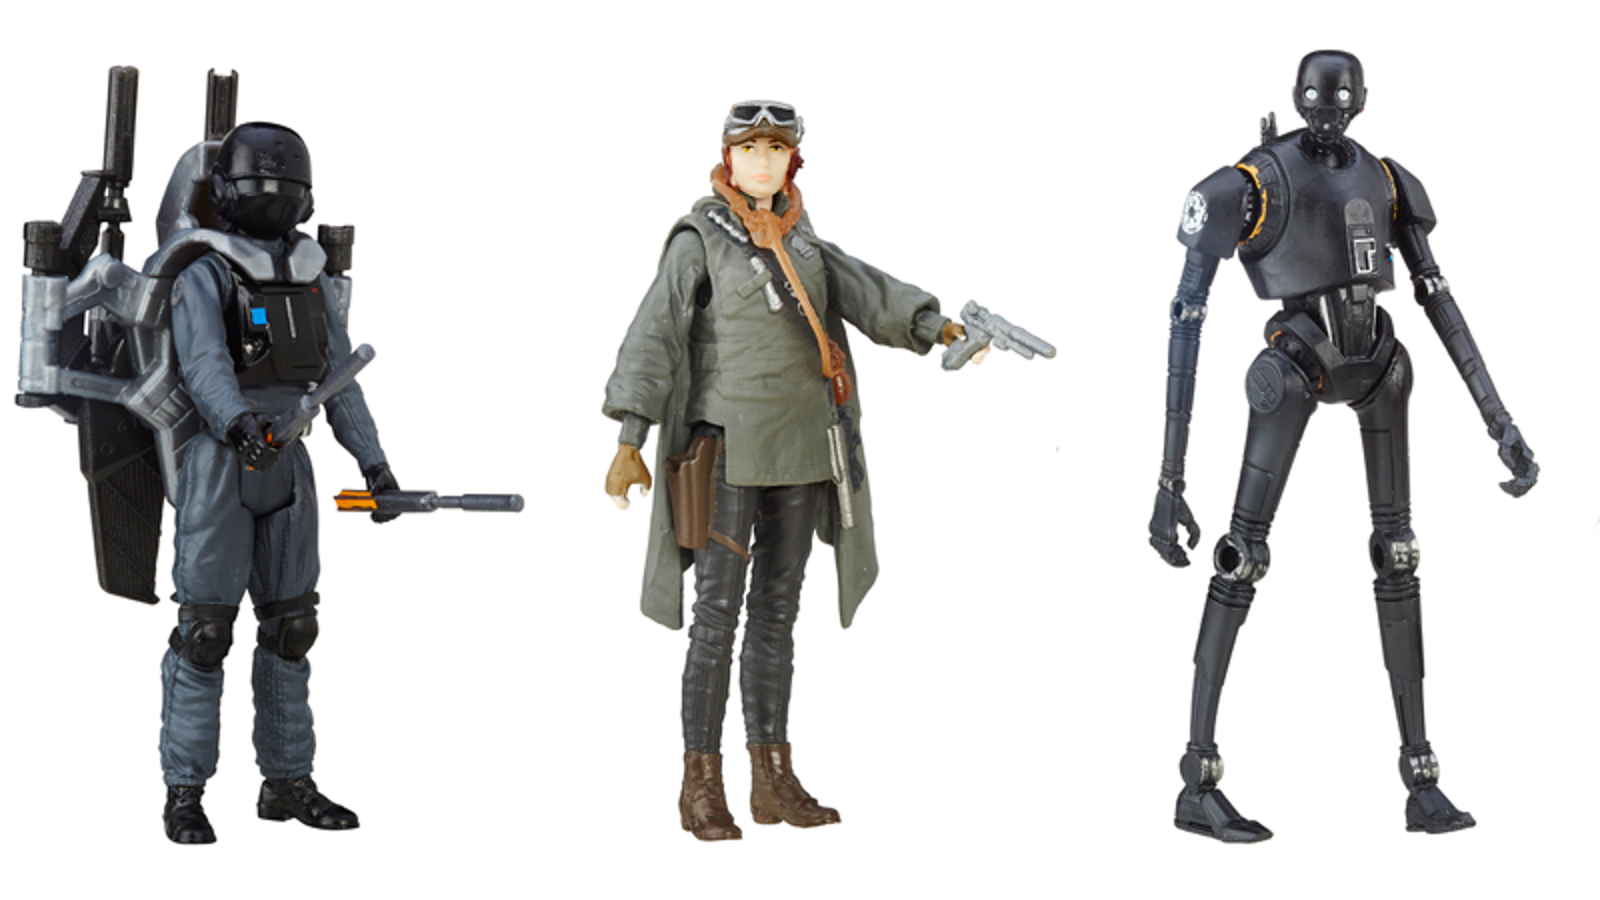 A First Look at Some Of the New Rogue One Action Figures and Playsets